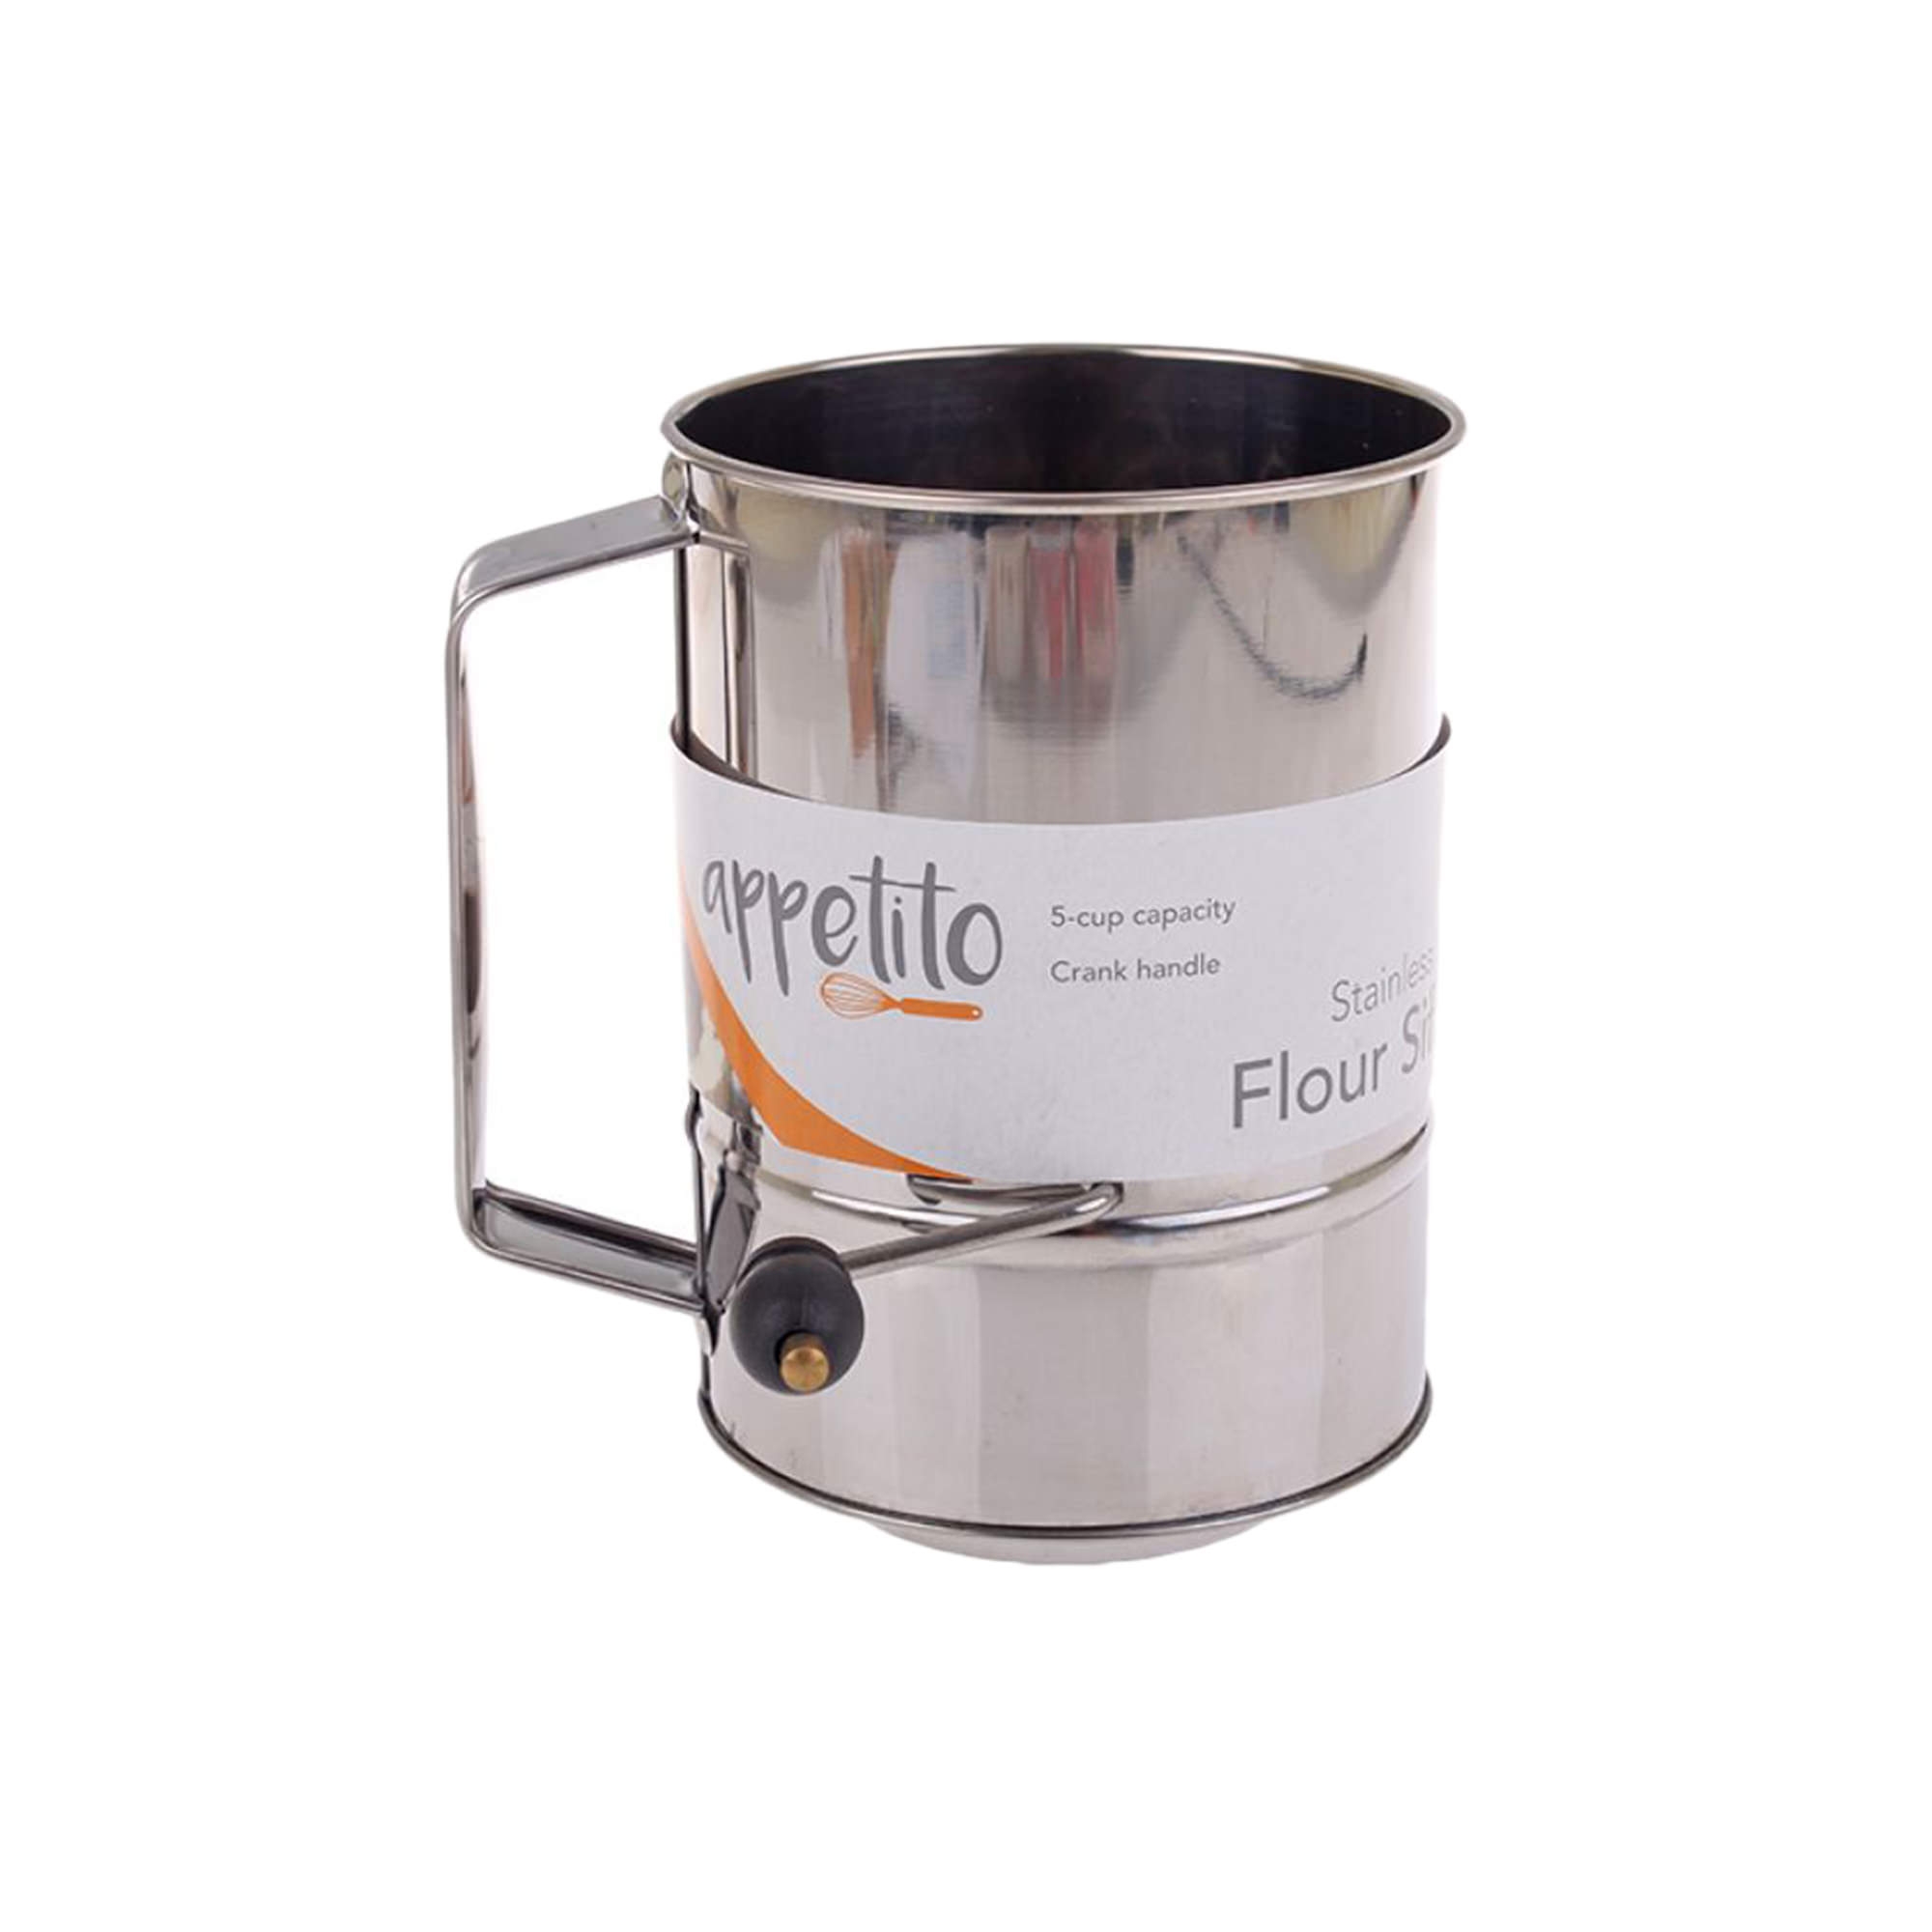 Daily Bake Flour Sifter Stainless Steel 5 Cup Image 2